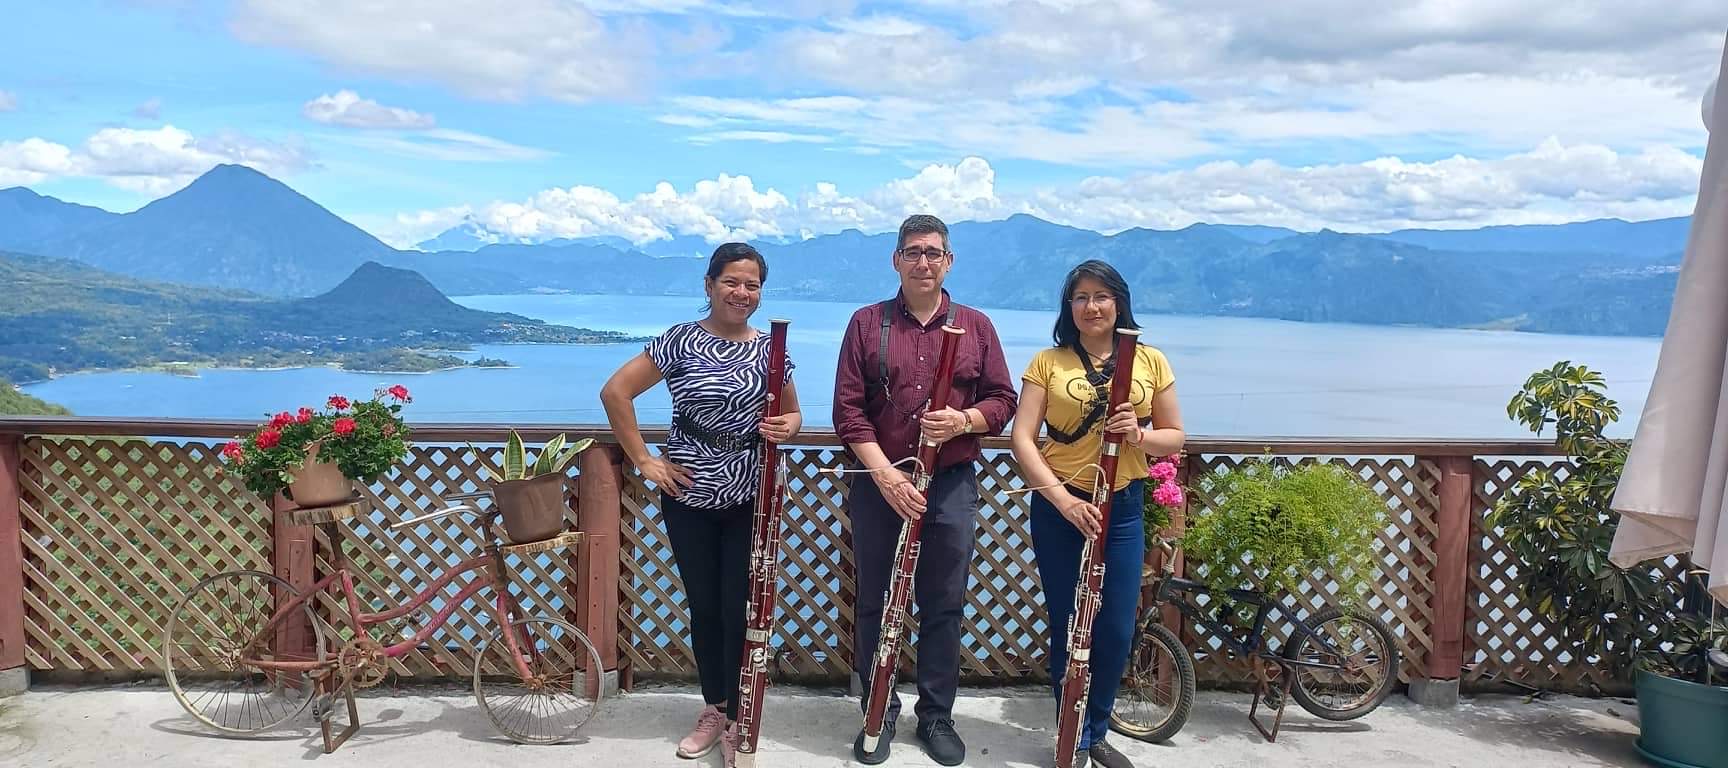 Benjamin Coelho in Guatemala with other bassoonists with mountainous landscape in back